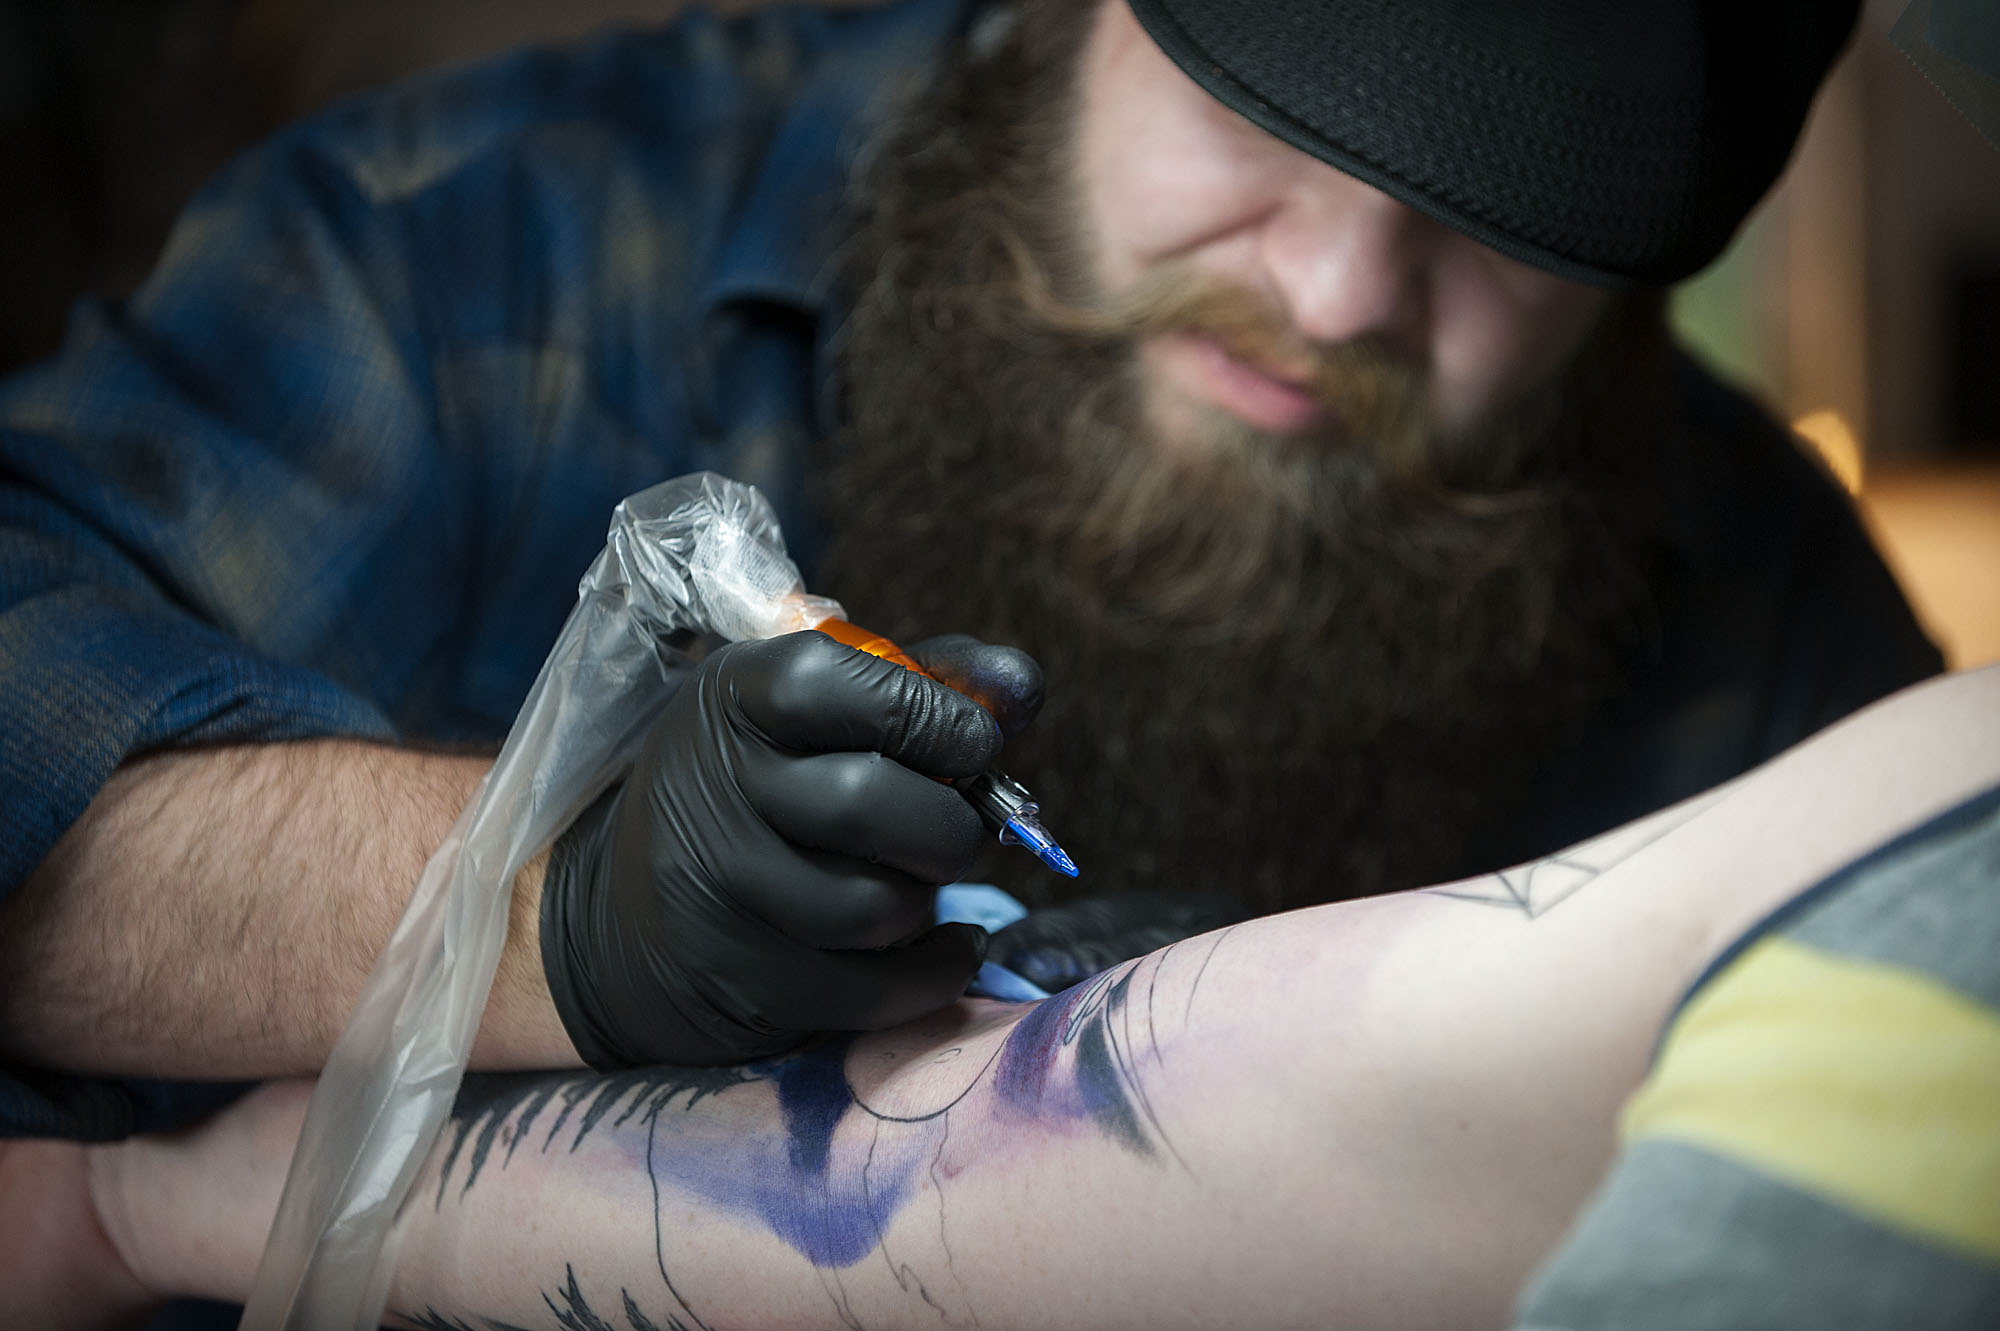 Tattoo artist Ryan "Boomer" Boomhower creates a tattoo with a Columbia River Gorge theme for customer Joel Schmid of Camas at 3rd Heart Tattoo on Tuesday afternoon, Oct. 6, 2015 in Washougal. (Amanda Cowan/The Columbian)